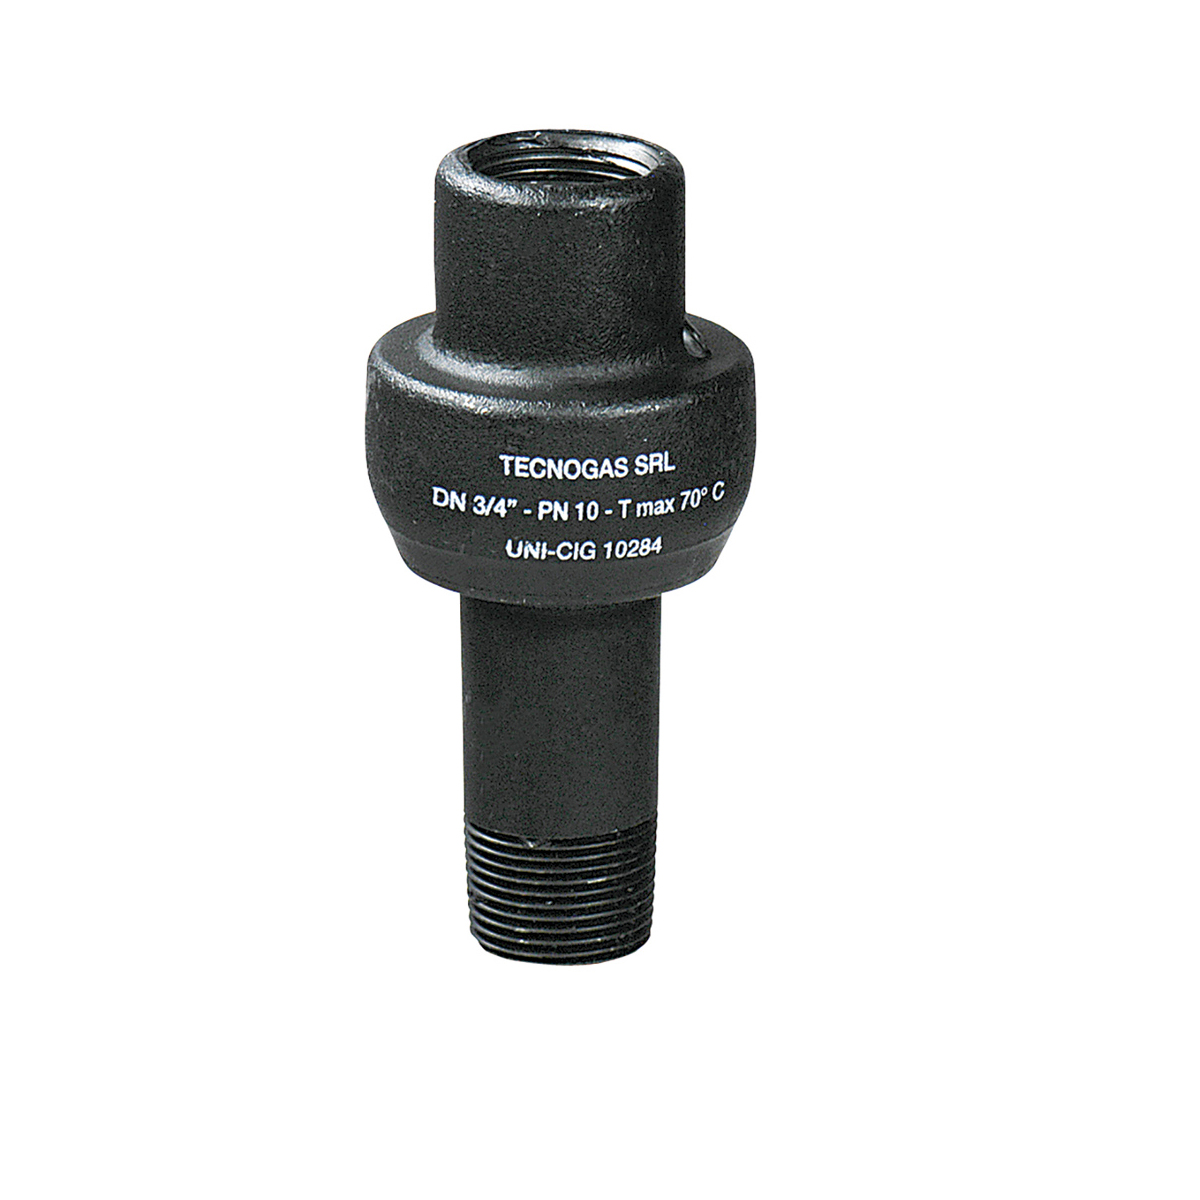 Dielectric Connectors for Gas Thr. Male/Female 2 1/2